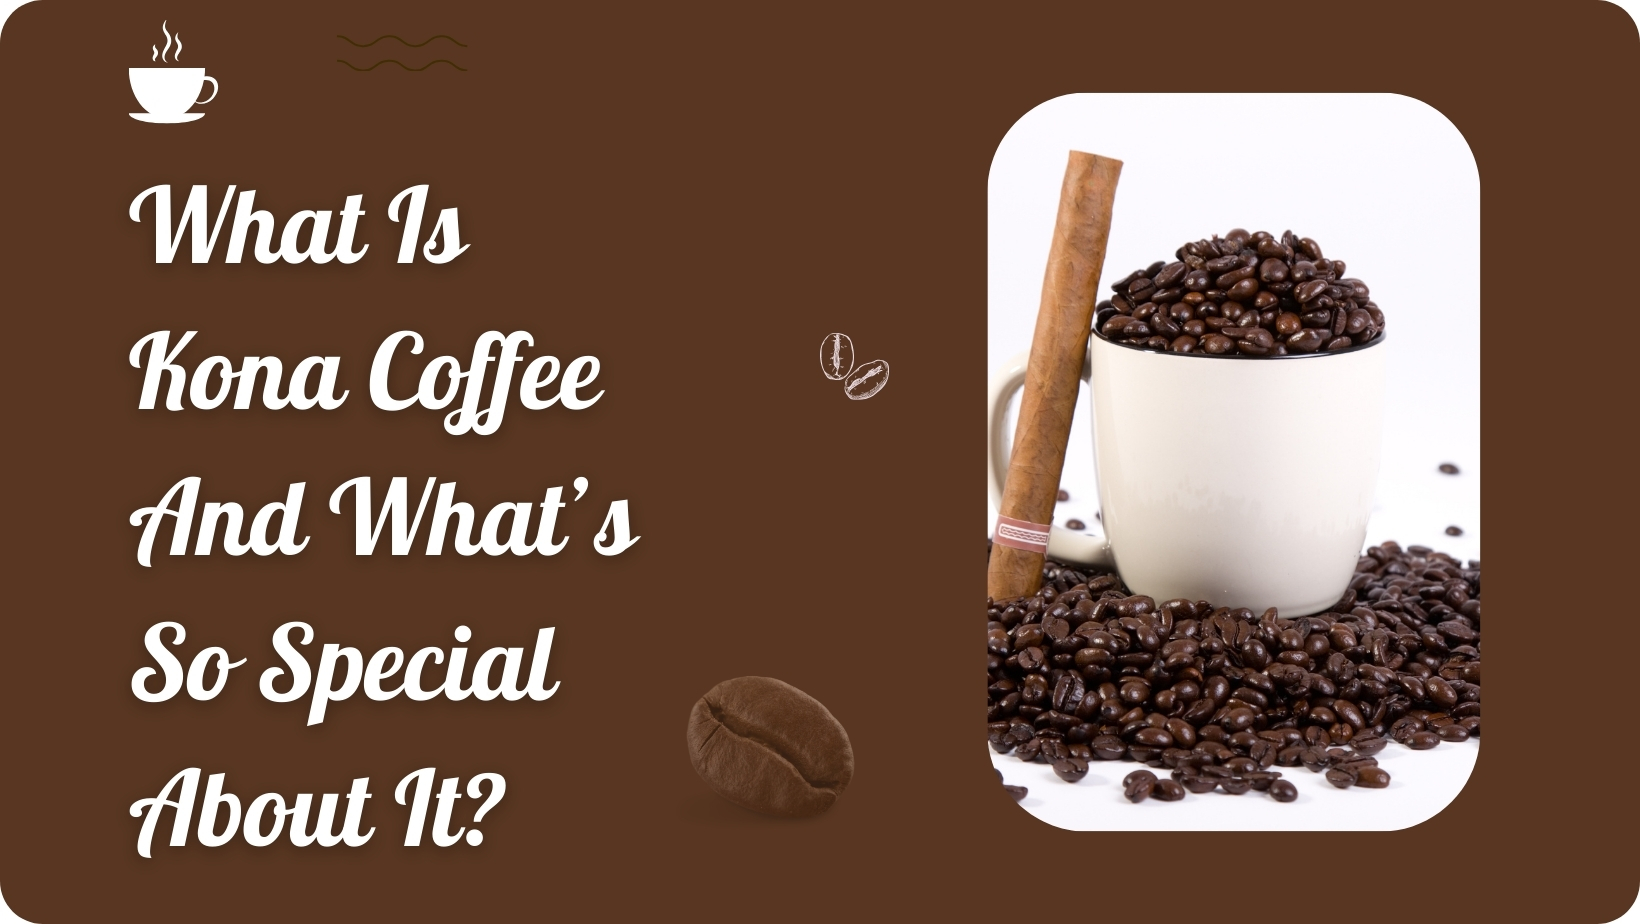 What Is Kona Coffee And What’s So Special About It?